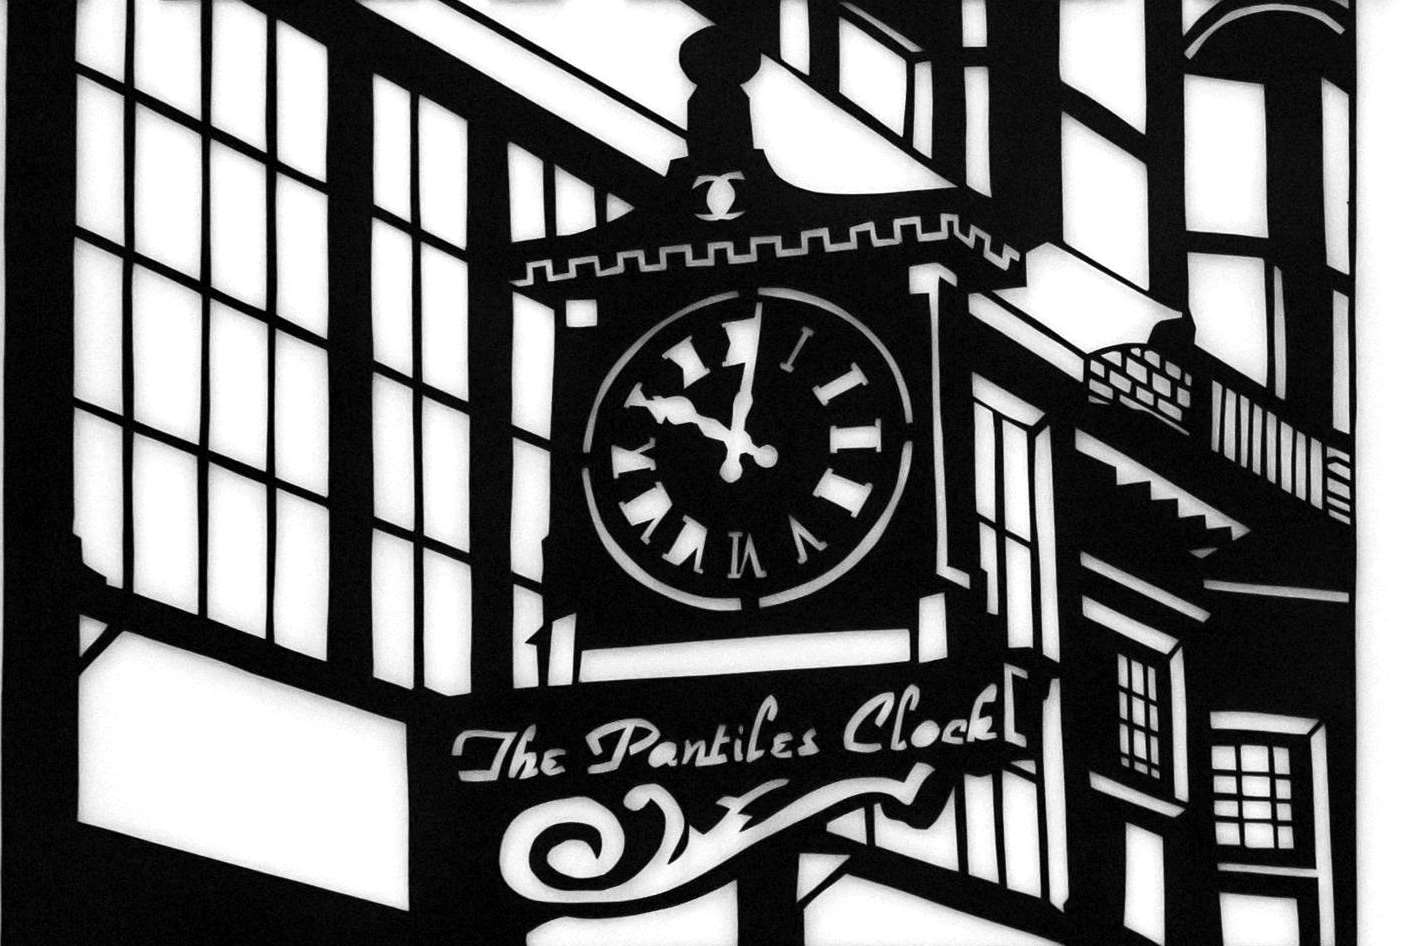 The papercut art of the Pantiles Clock will be hung on the wall in the office of Mayor of Wiesbaden